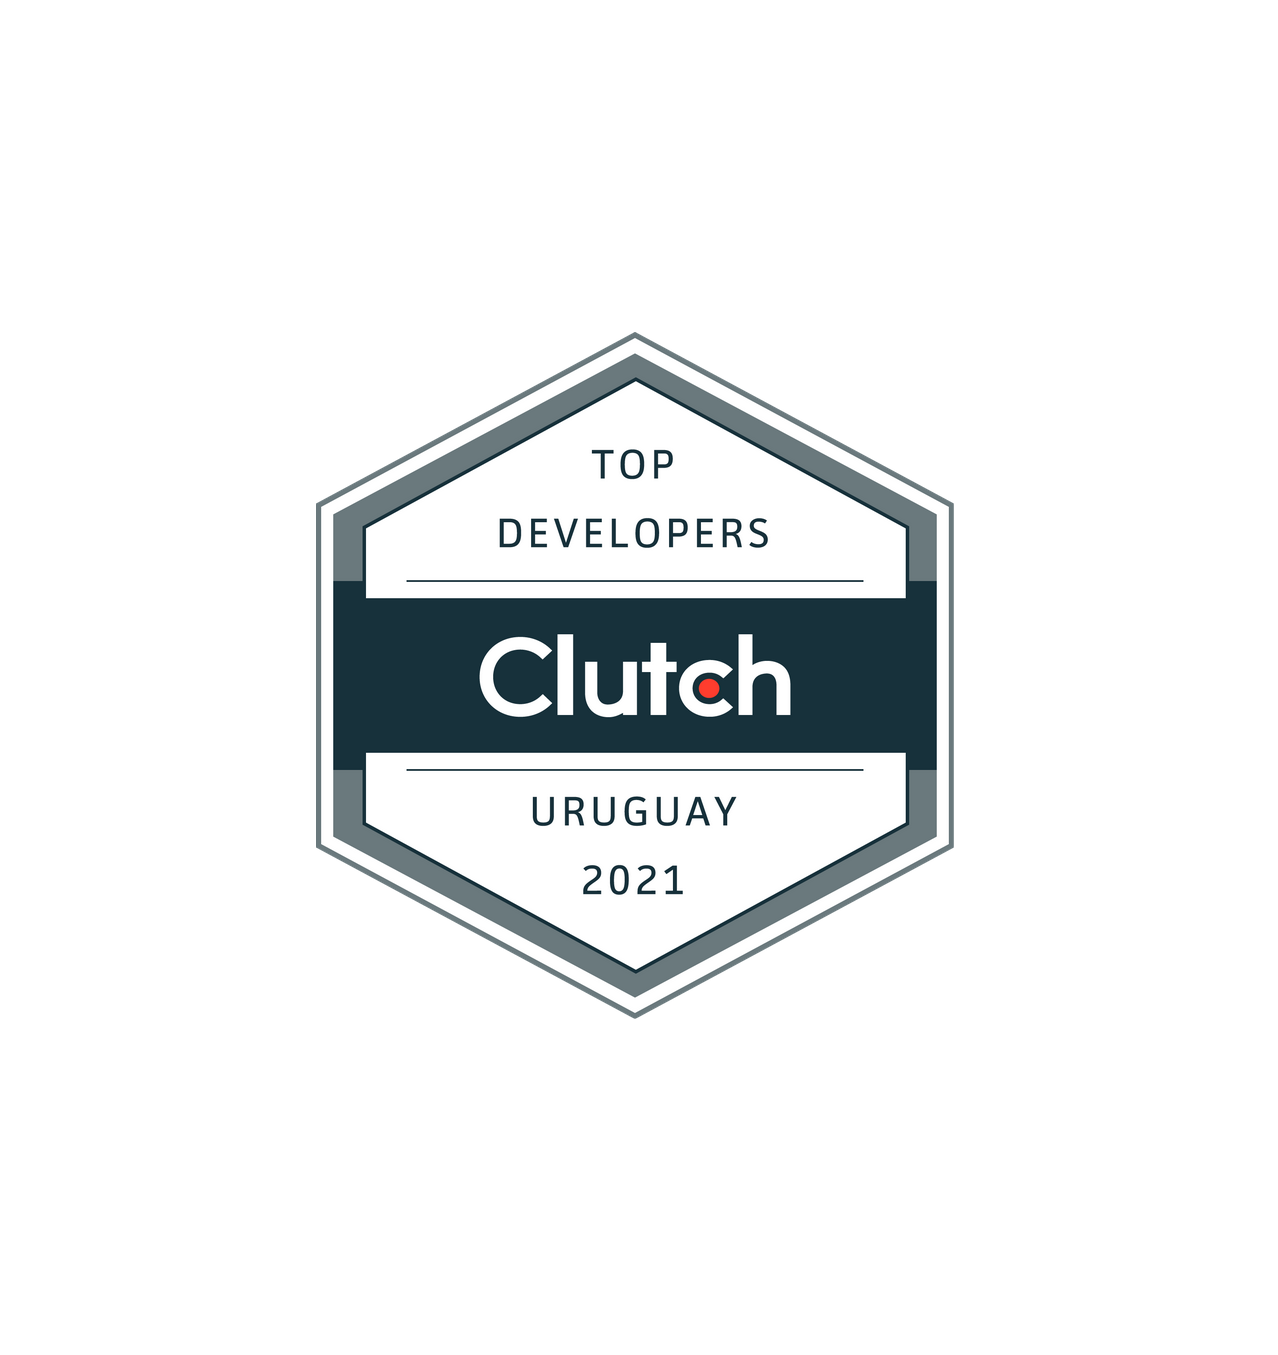 Clutch Commemorates FraSal as Uruguay’s Leading Software Developer for 2021